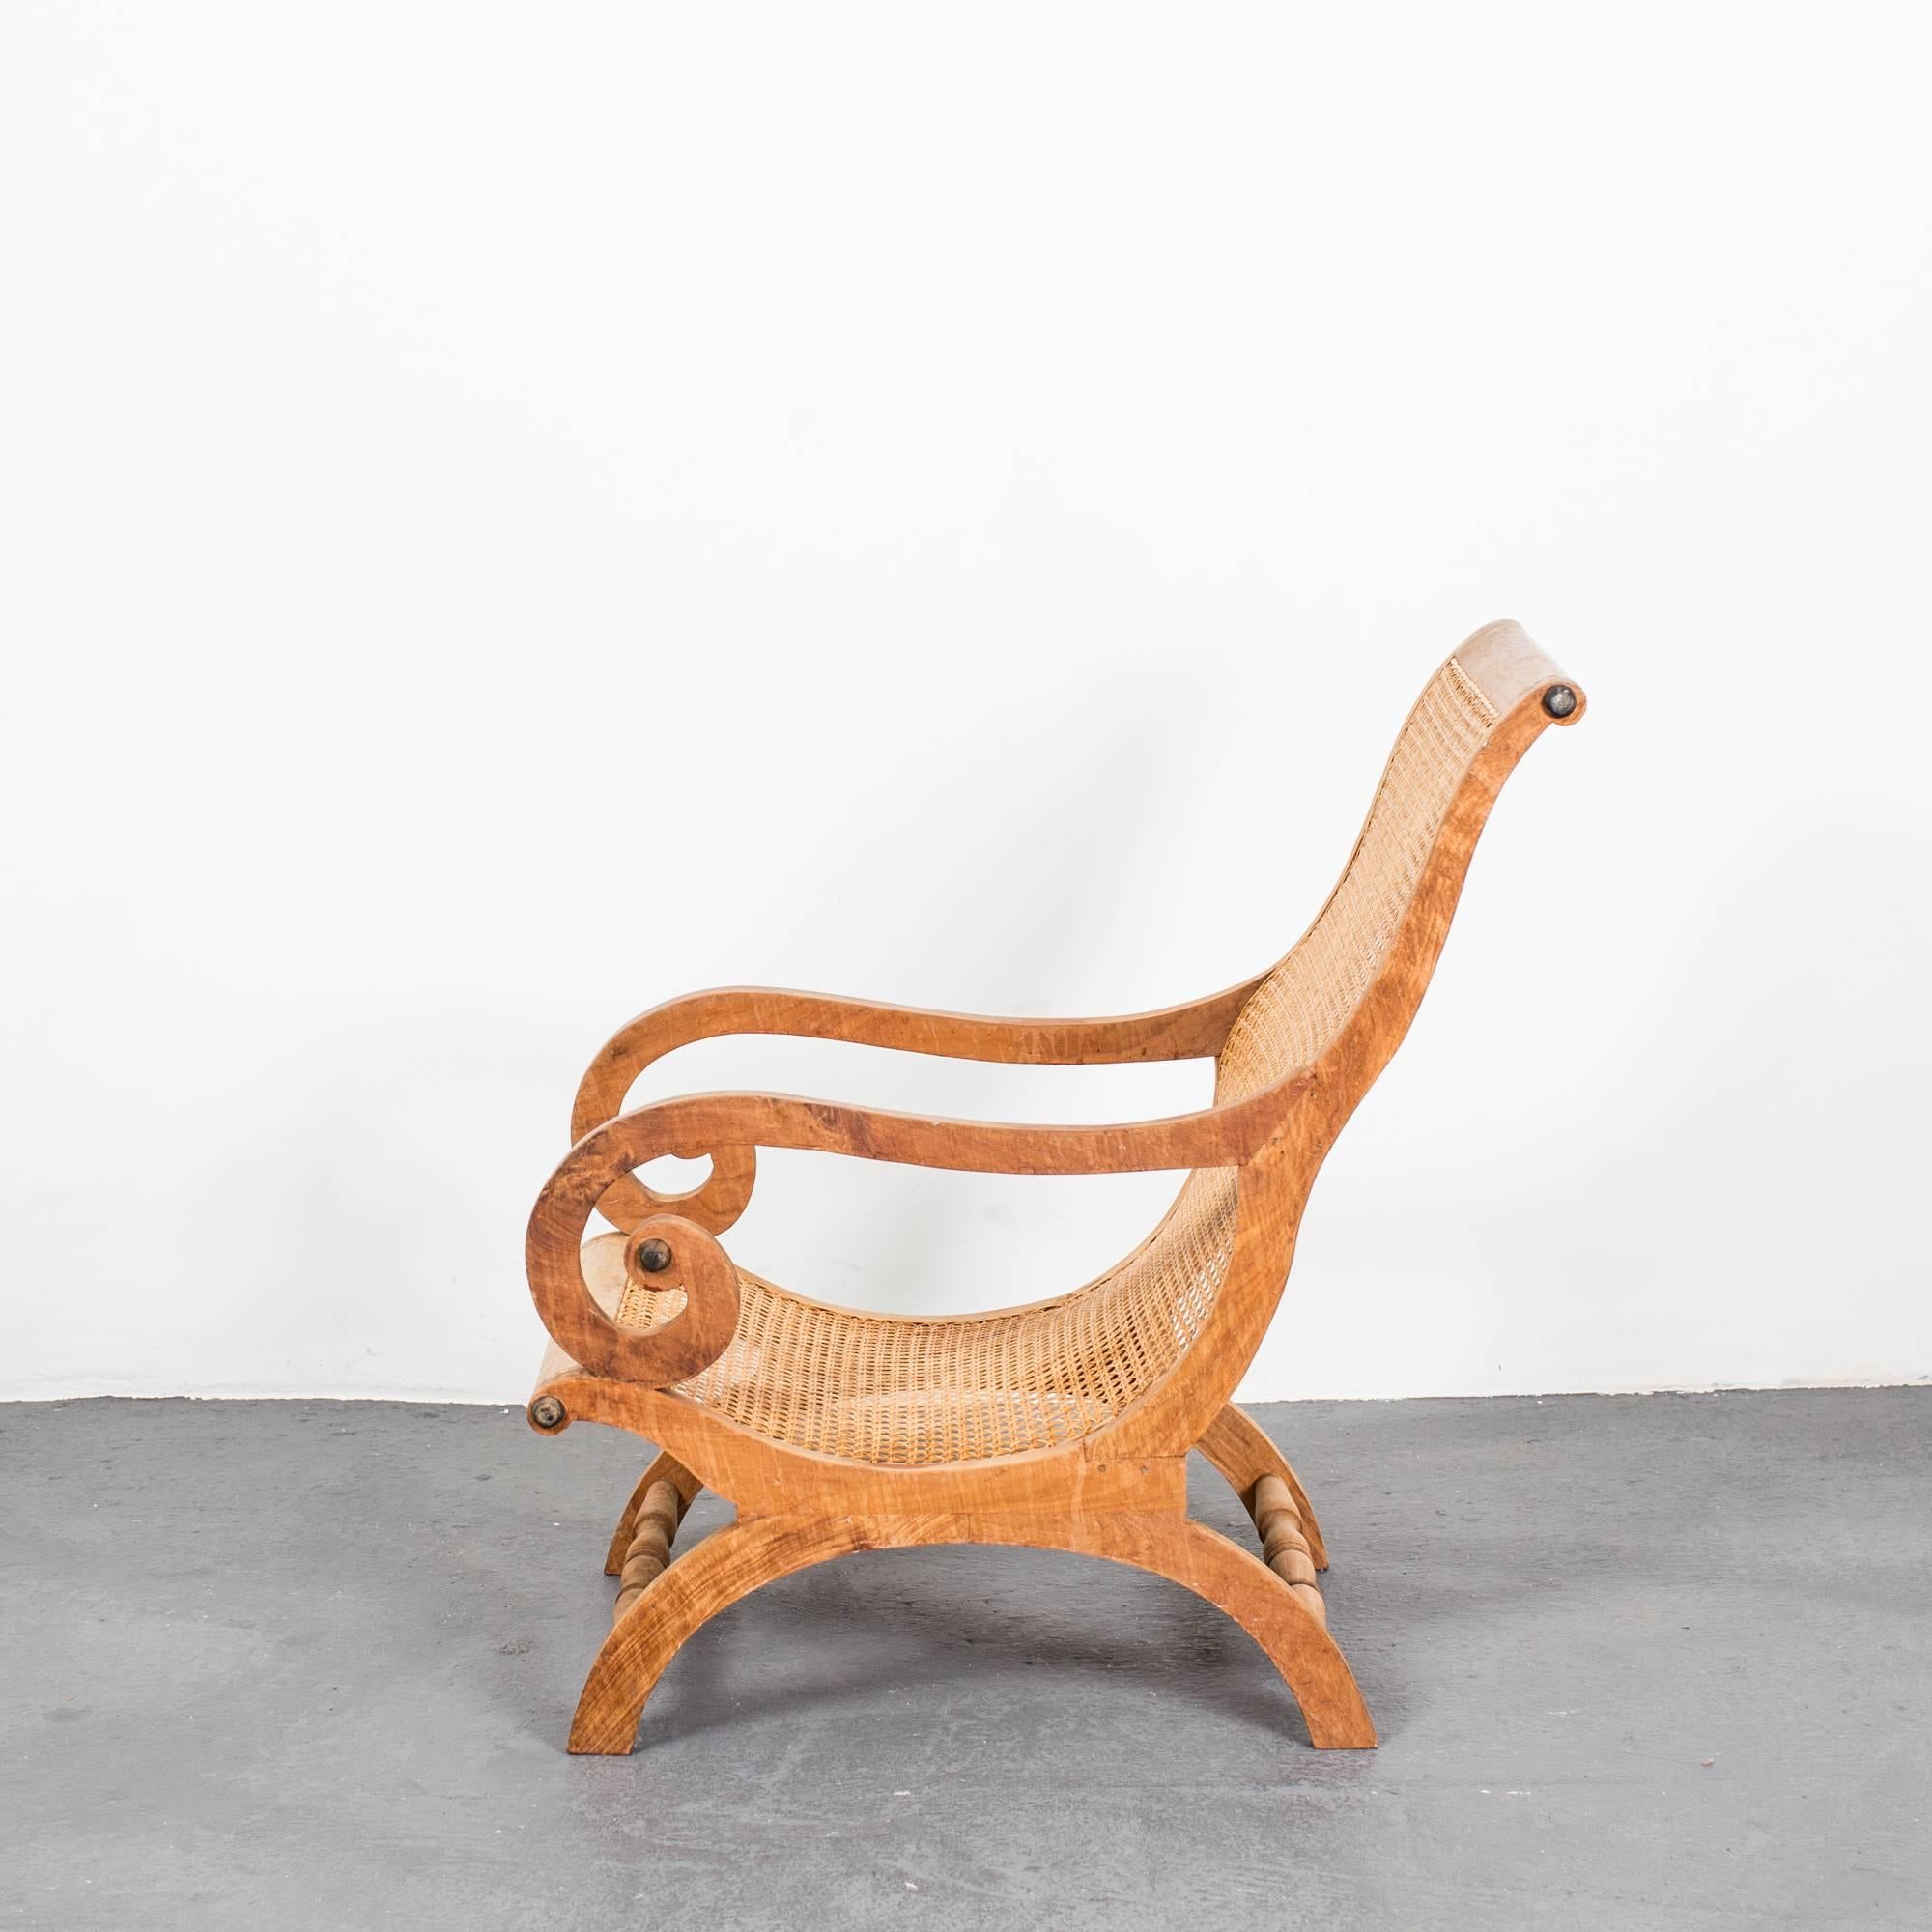 A beautiful but relaxed armchair or lounge chair made during the mid-19th century in Sweden. Frame made from elm and seat from rattan.